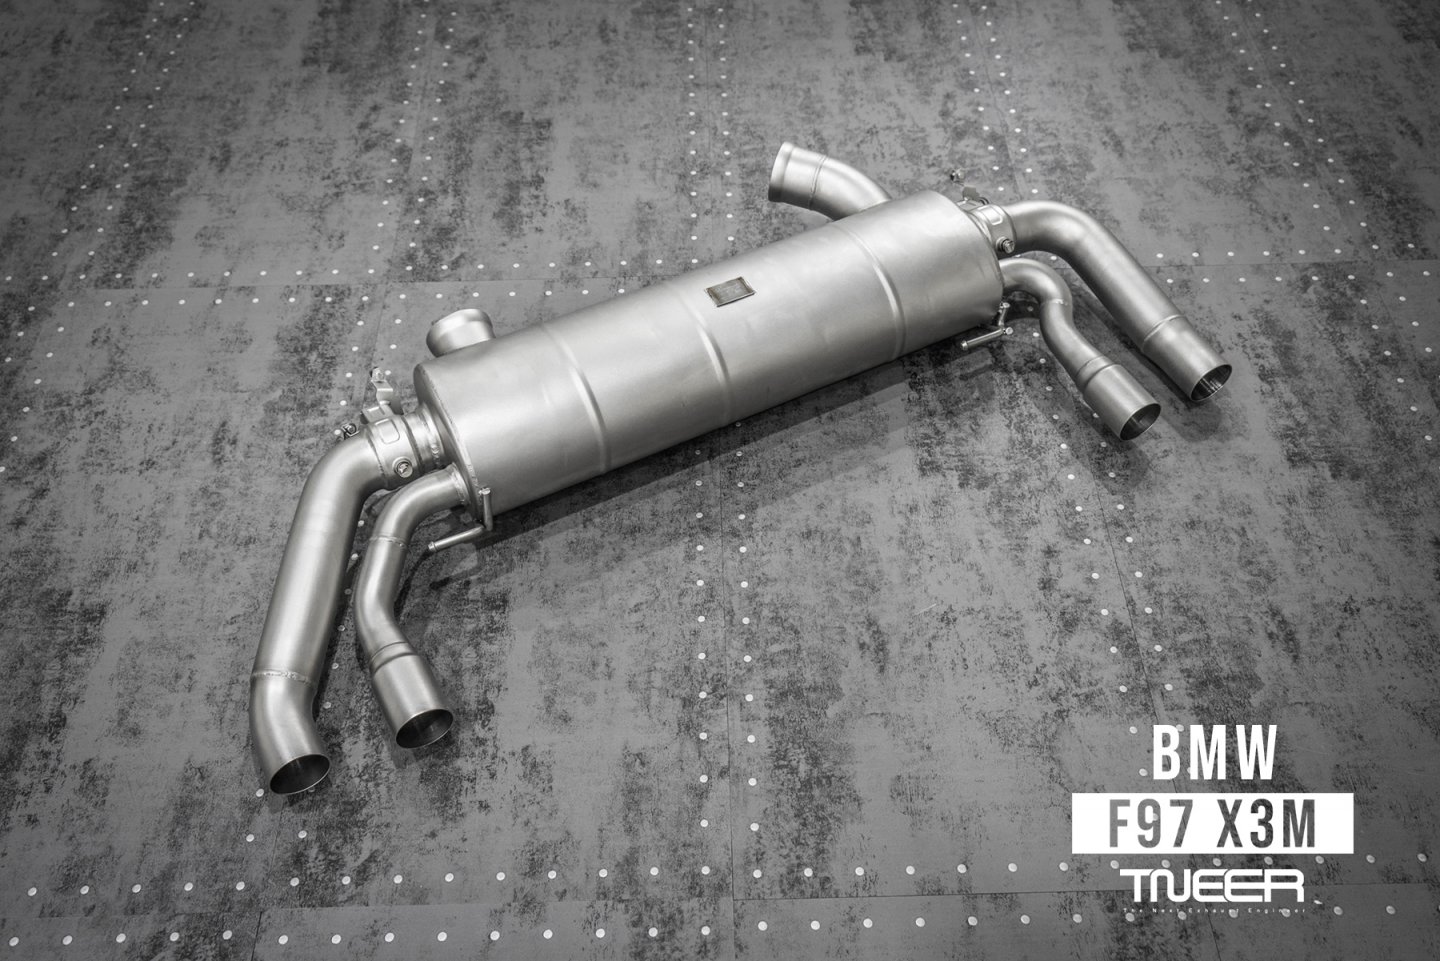 BMW F97 (X3M) Competition TNEER Exhaust System with EV and TACS